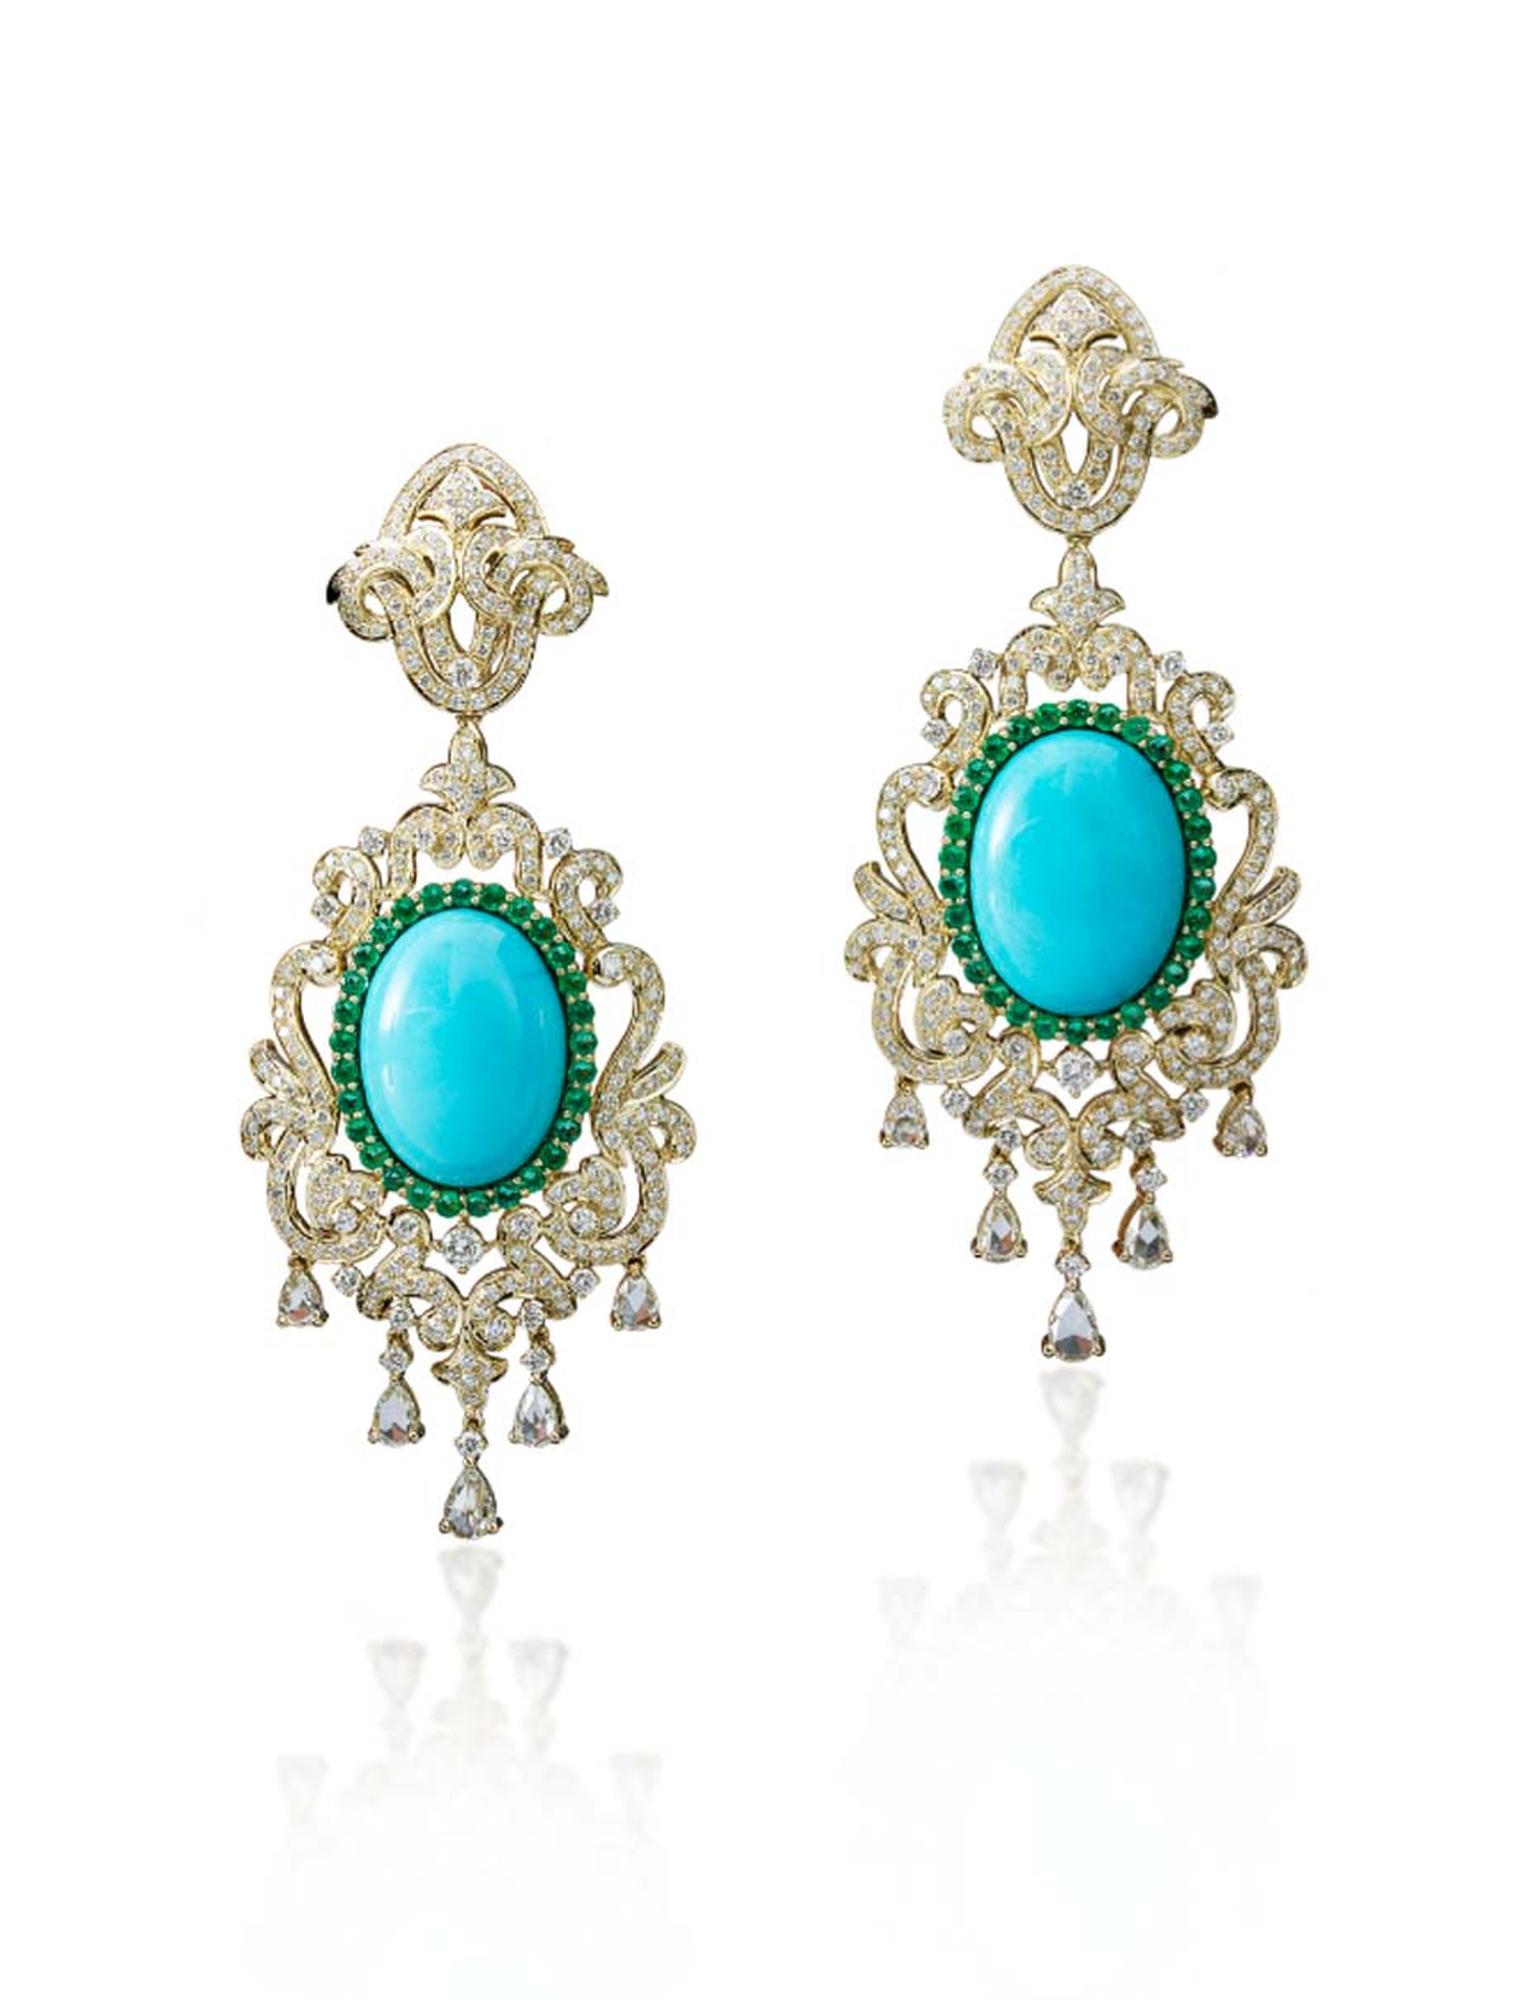 Farah Khan gold earrings featuring diamonds, emeralds and turquoise.